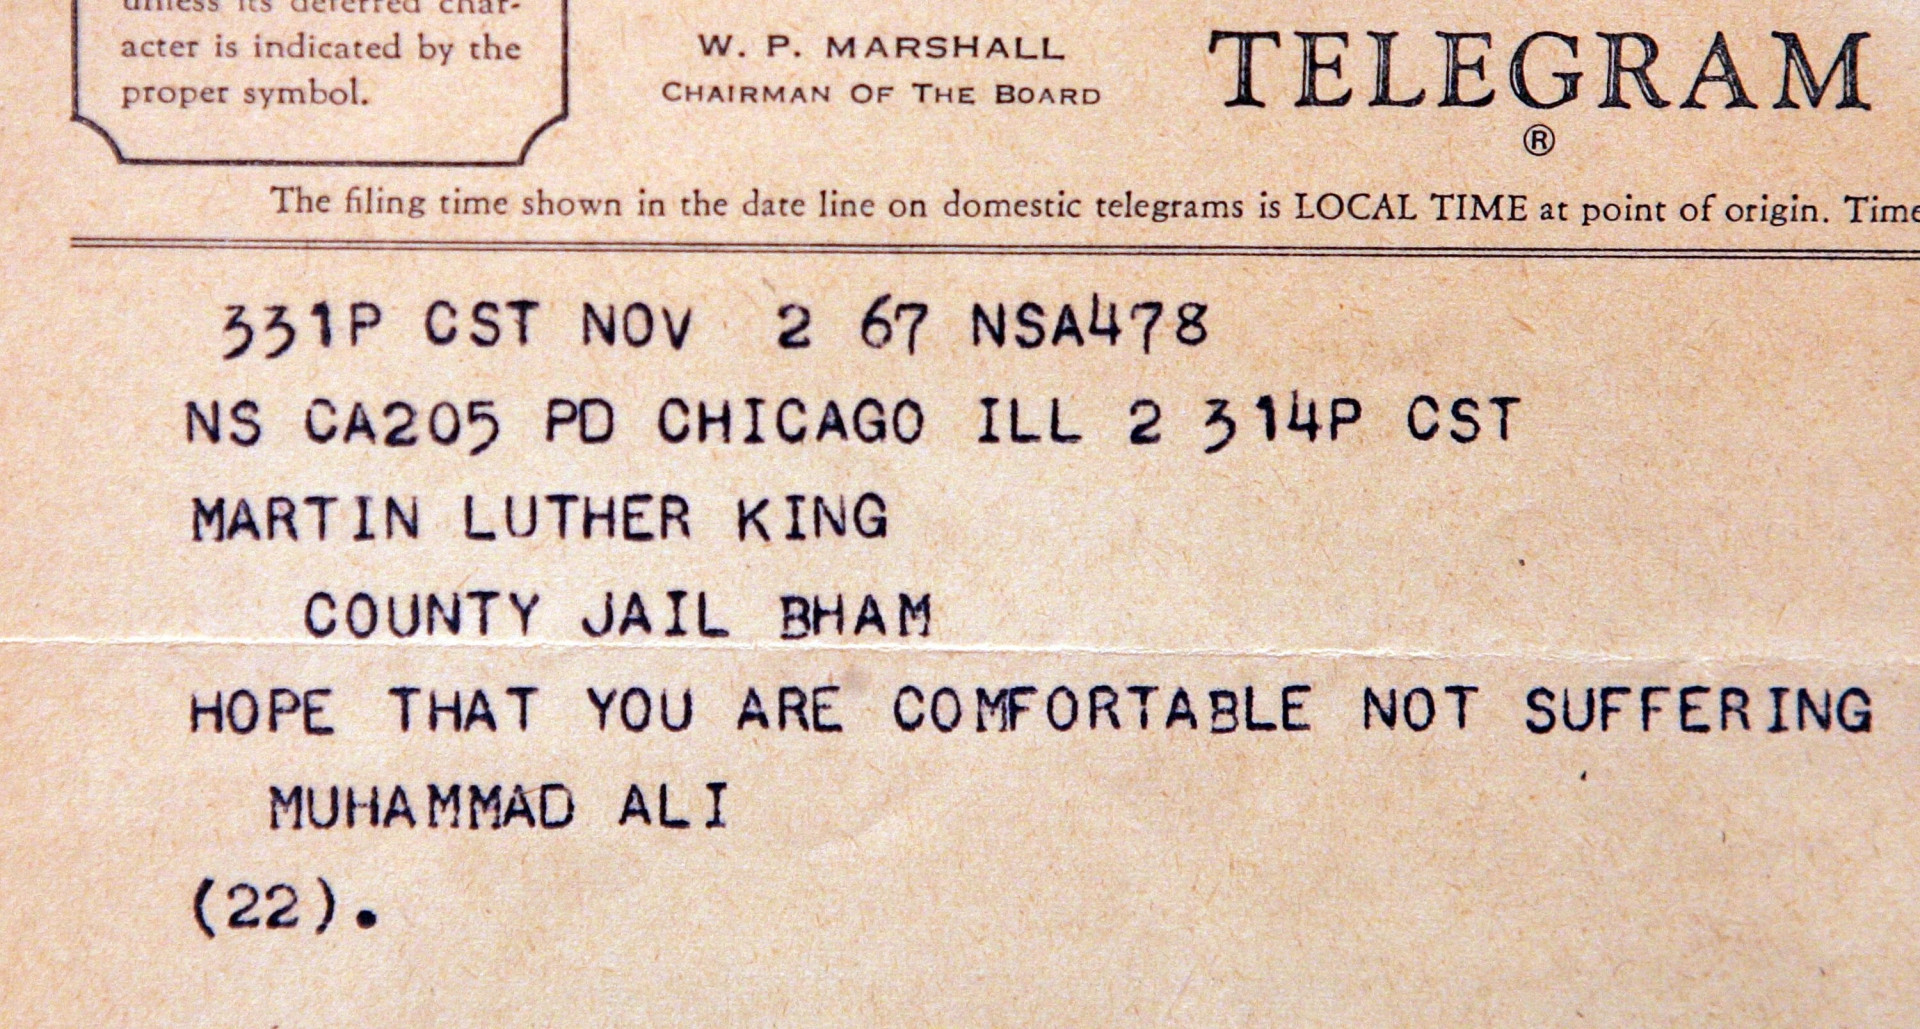 Incarcerated in Birmingham County Jail, King received several telegrams of support, including this message from boxer Muhammad Ali.<p>You may also like:<a href="https://www.starsinsider.com/n/277940?utm_source=msn.com&utm_medium=display&utm_campaign=referral_description&utm_content=347864v15en-us"> The most extravagant celebrity purchases</a></p>